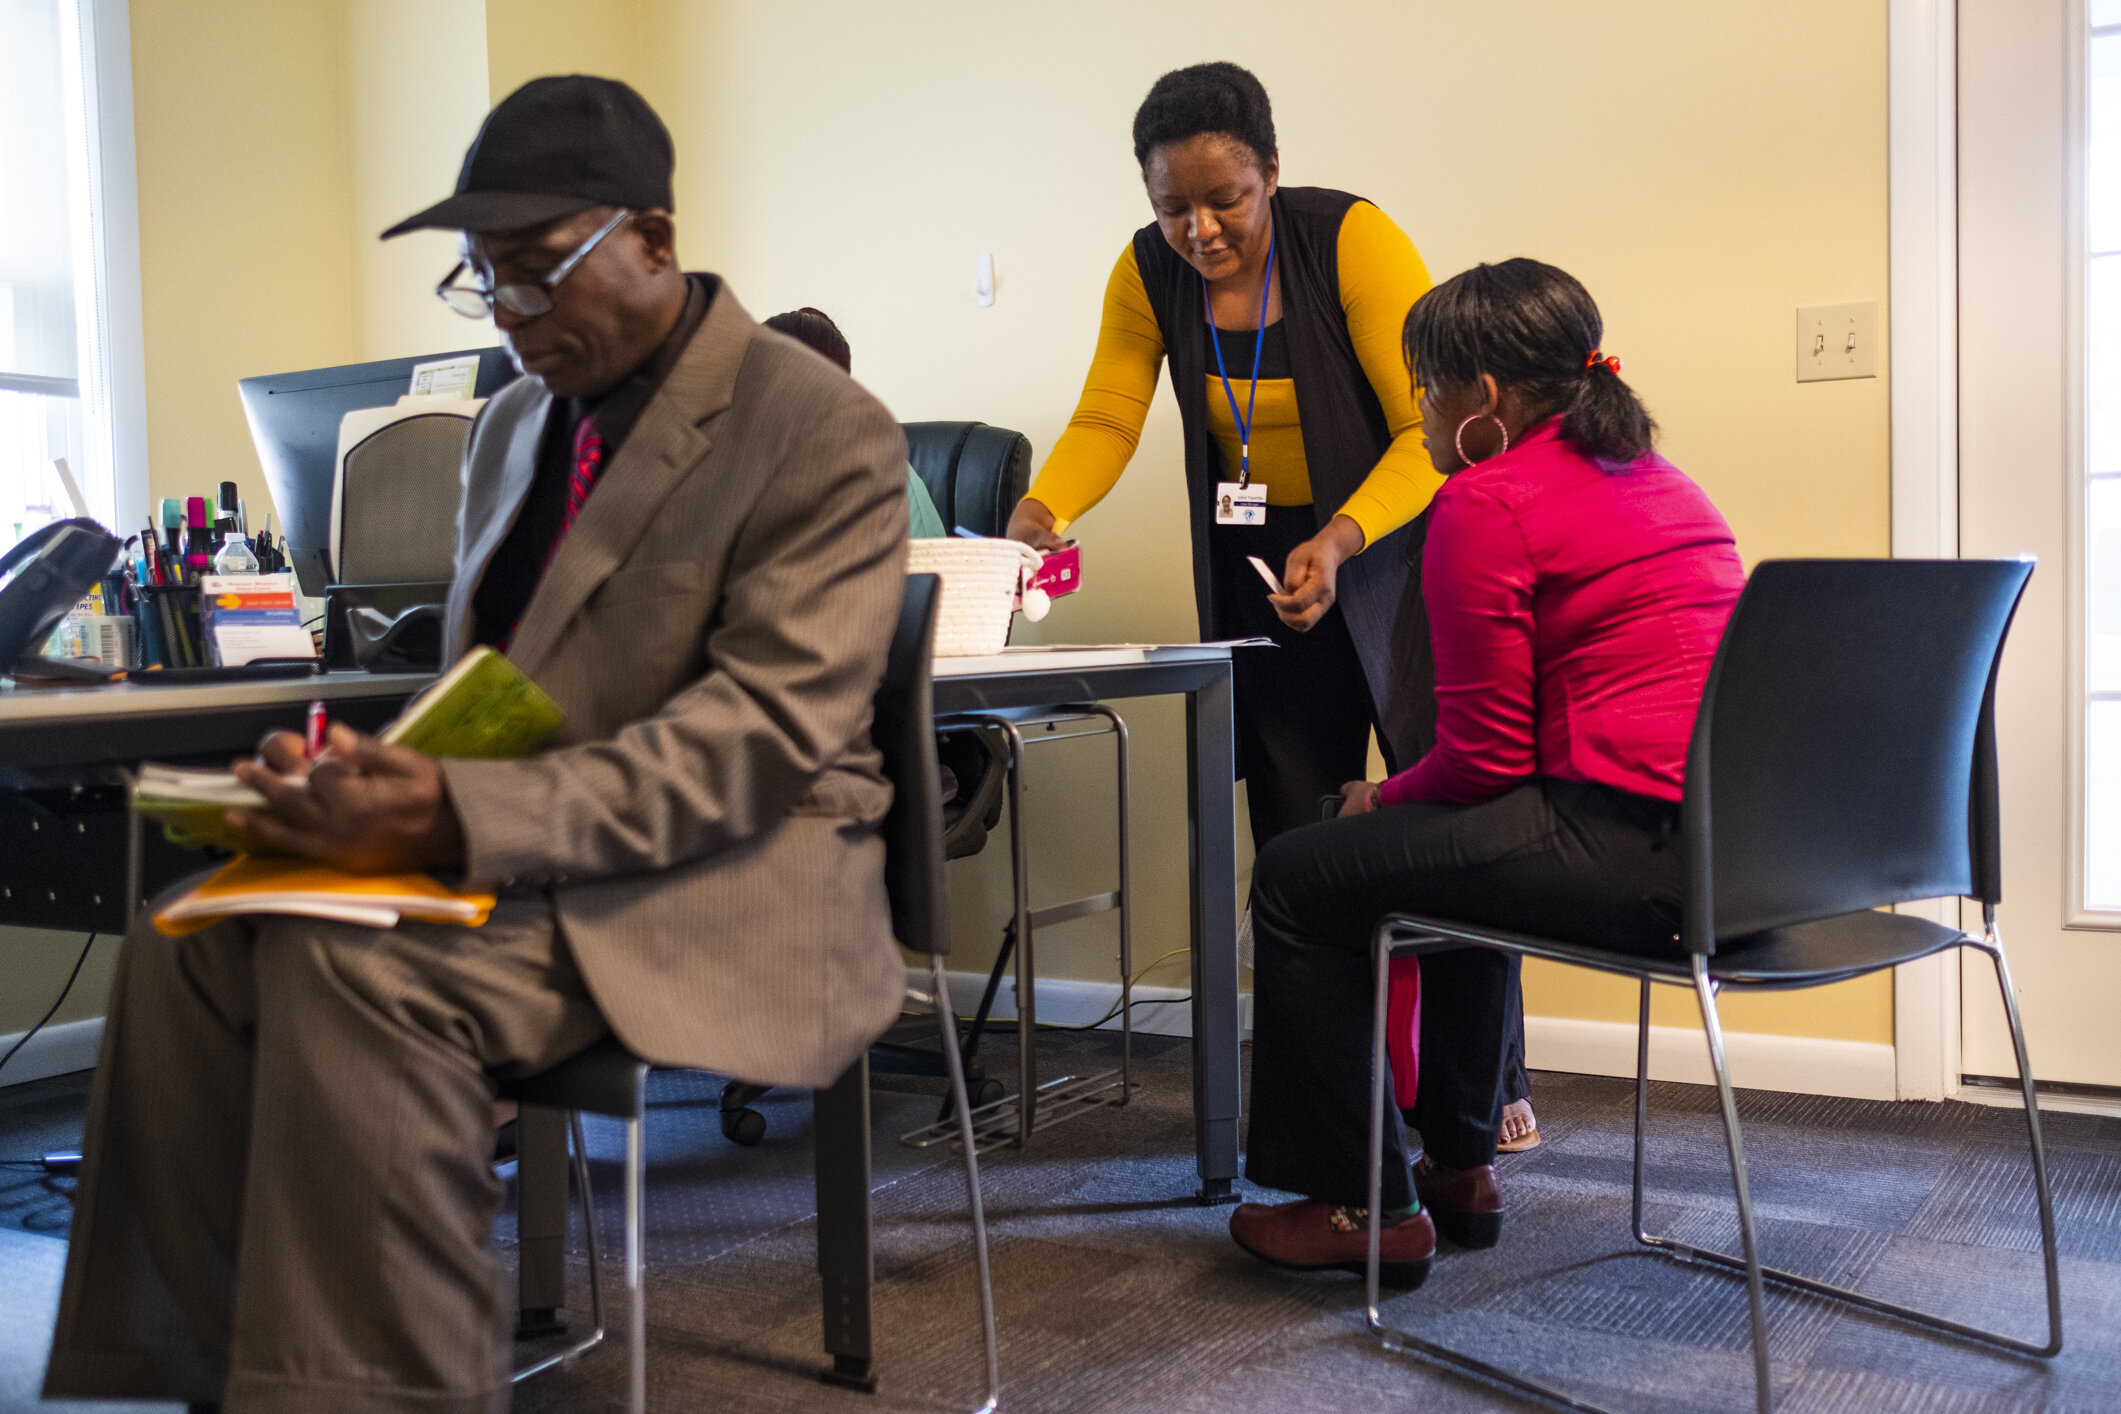  Isabel, the case management director of the RDC,  guides a small group during a job placement consultation. 